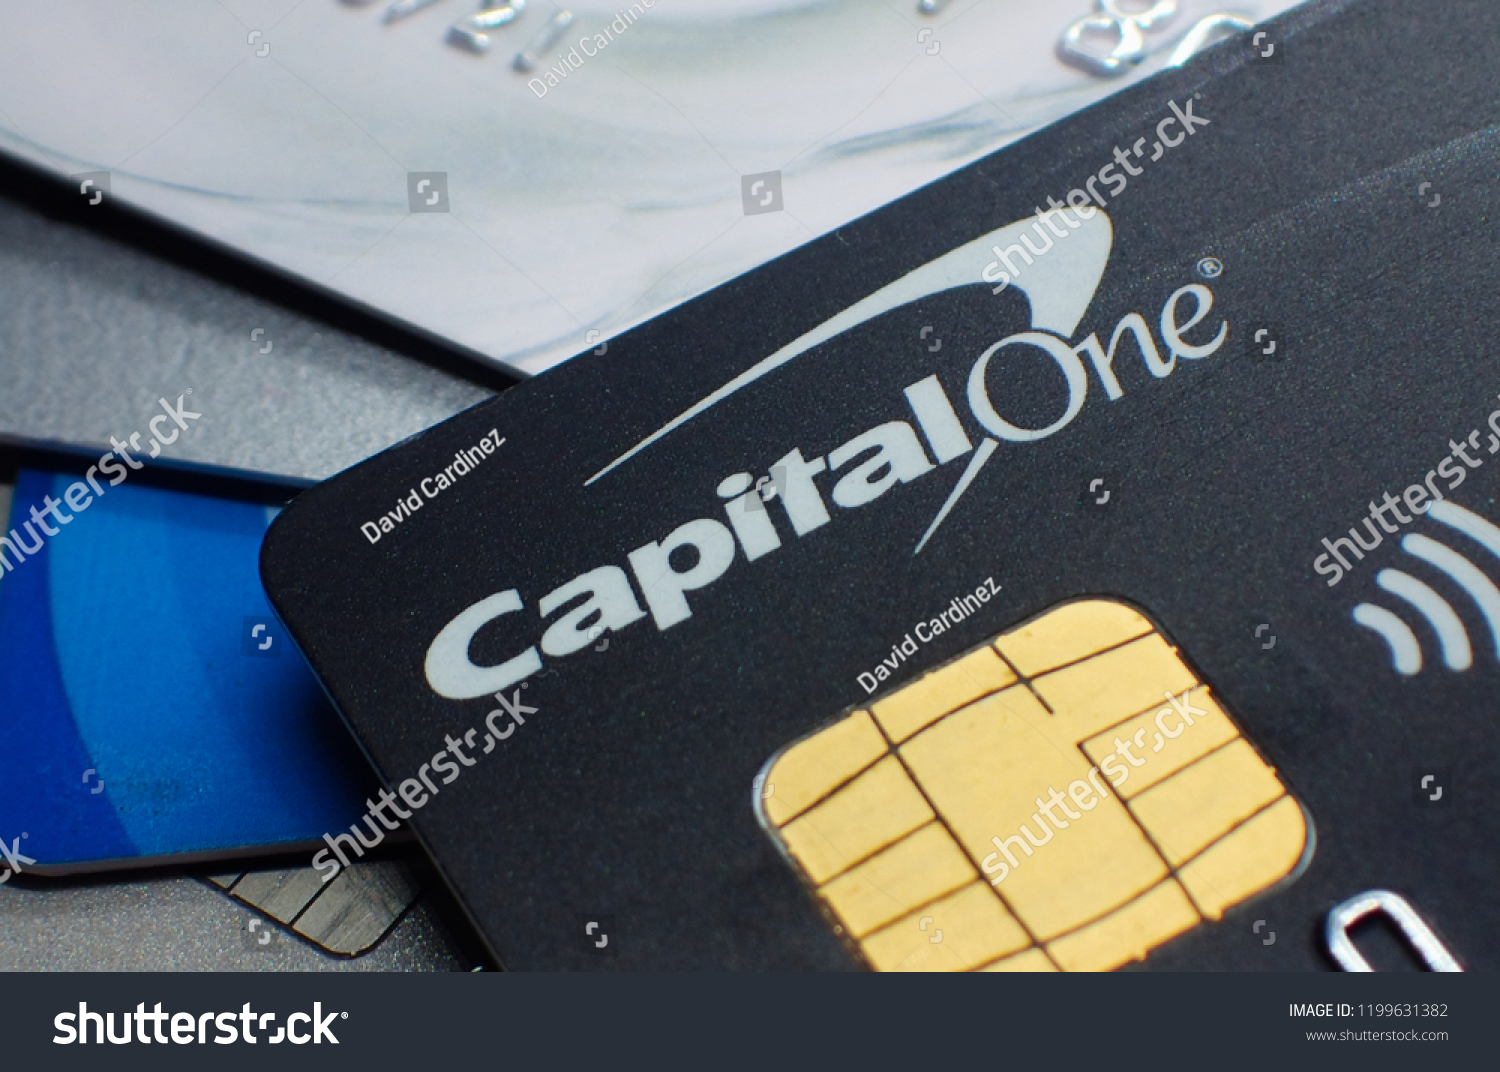 180,863 Capital one Images, Stock Photos & Vectors | Shutterstock